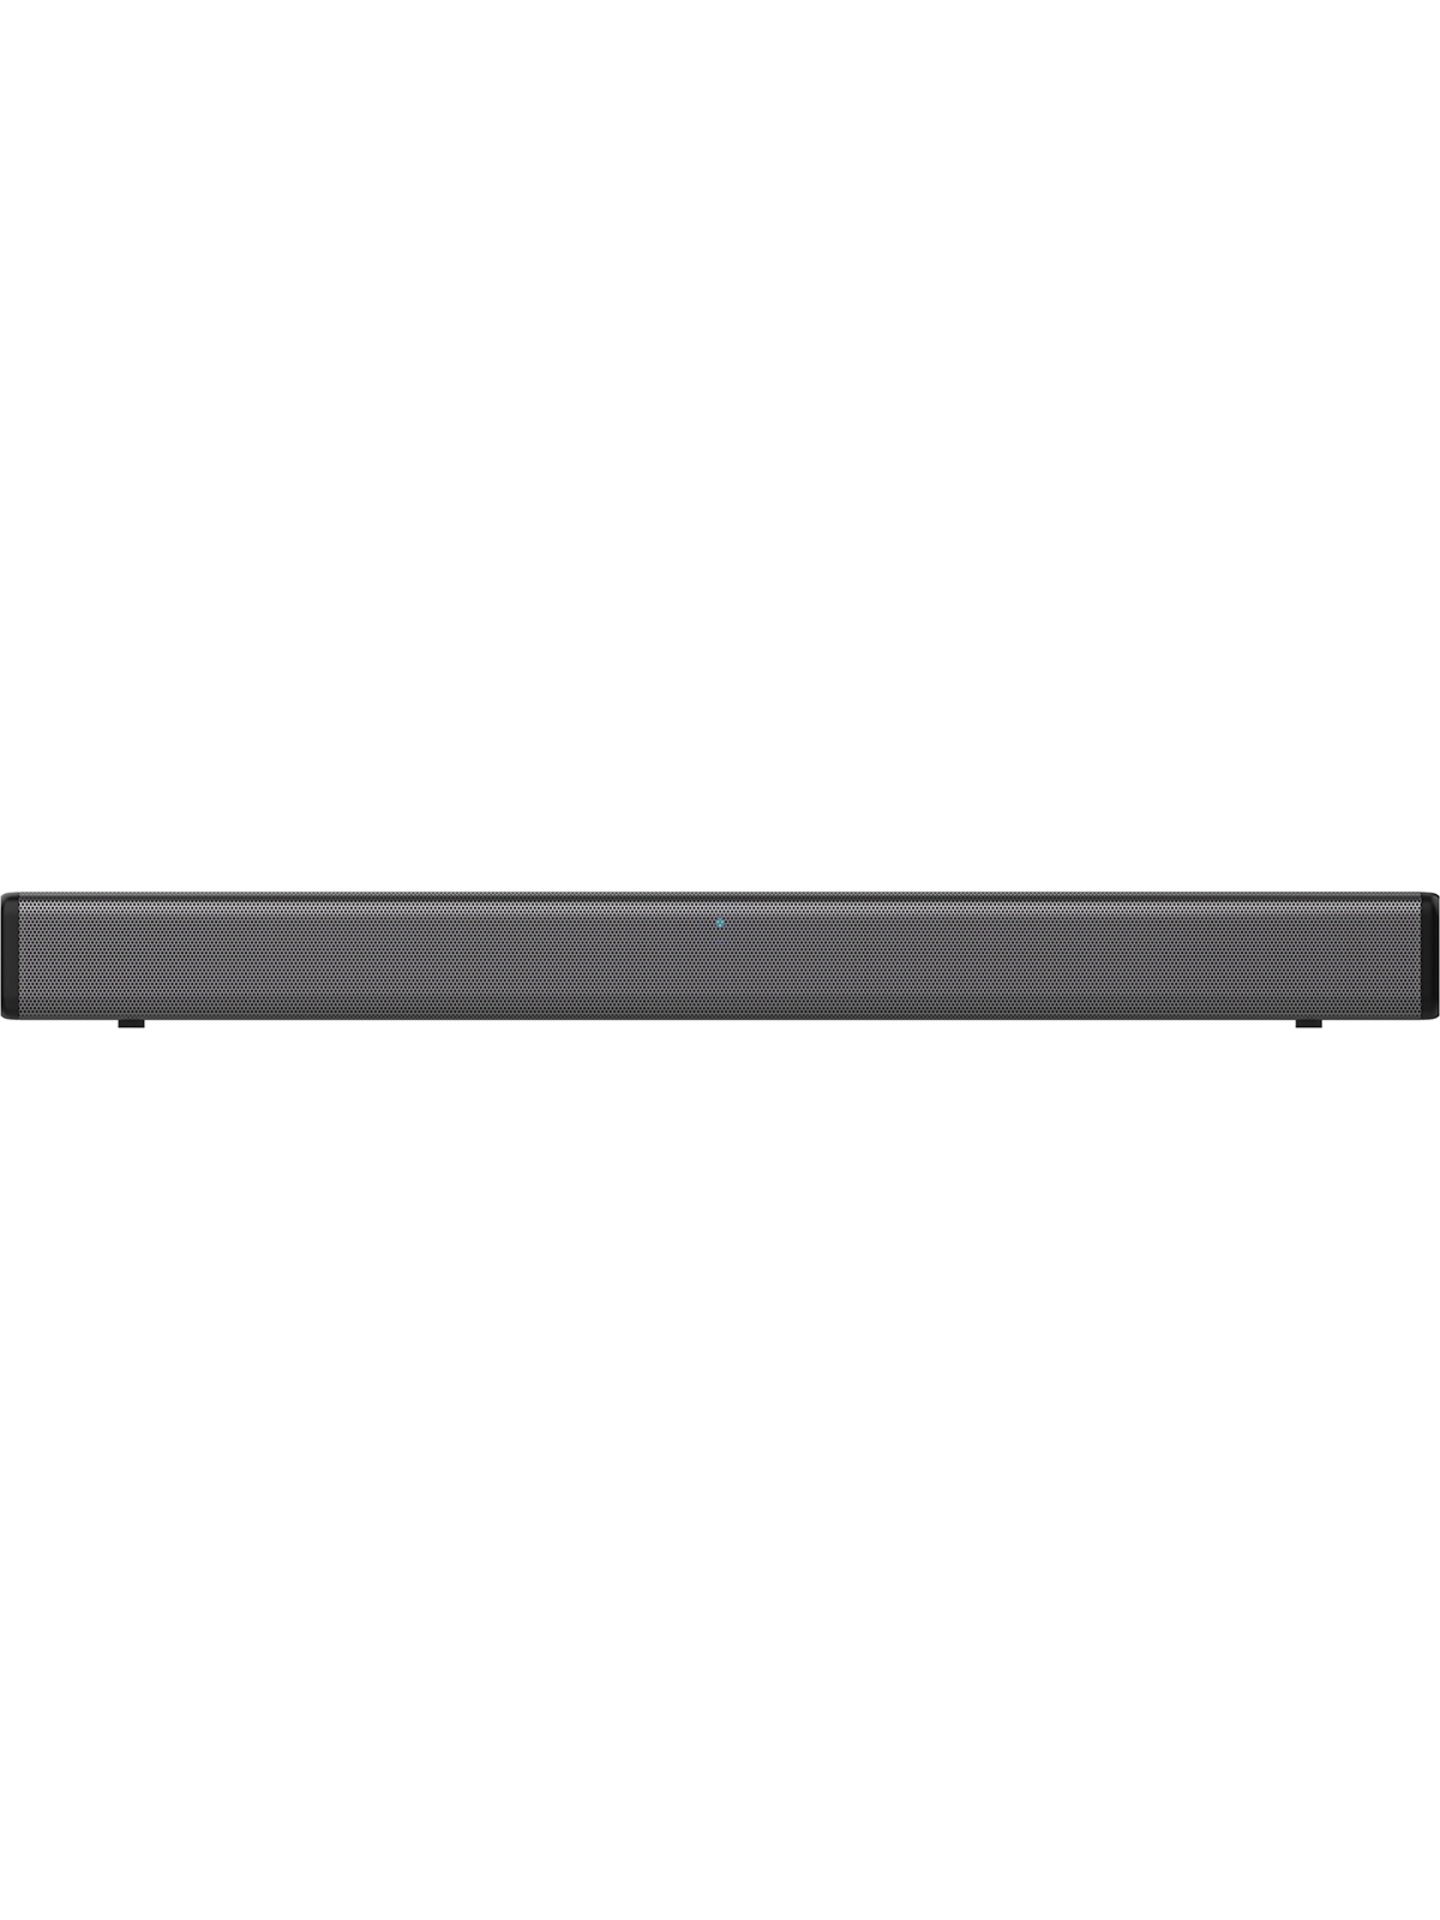 A1 PRODUCT NEW - HISENSE HS214 ALL-IN-ONE SOUNDBAR WITH SUB AND BLUETOOTH IN SILVER - RRP Ã‚Â£129 - Bild 3 aus 8